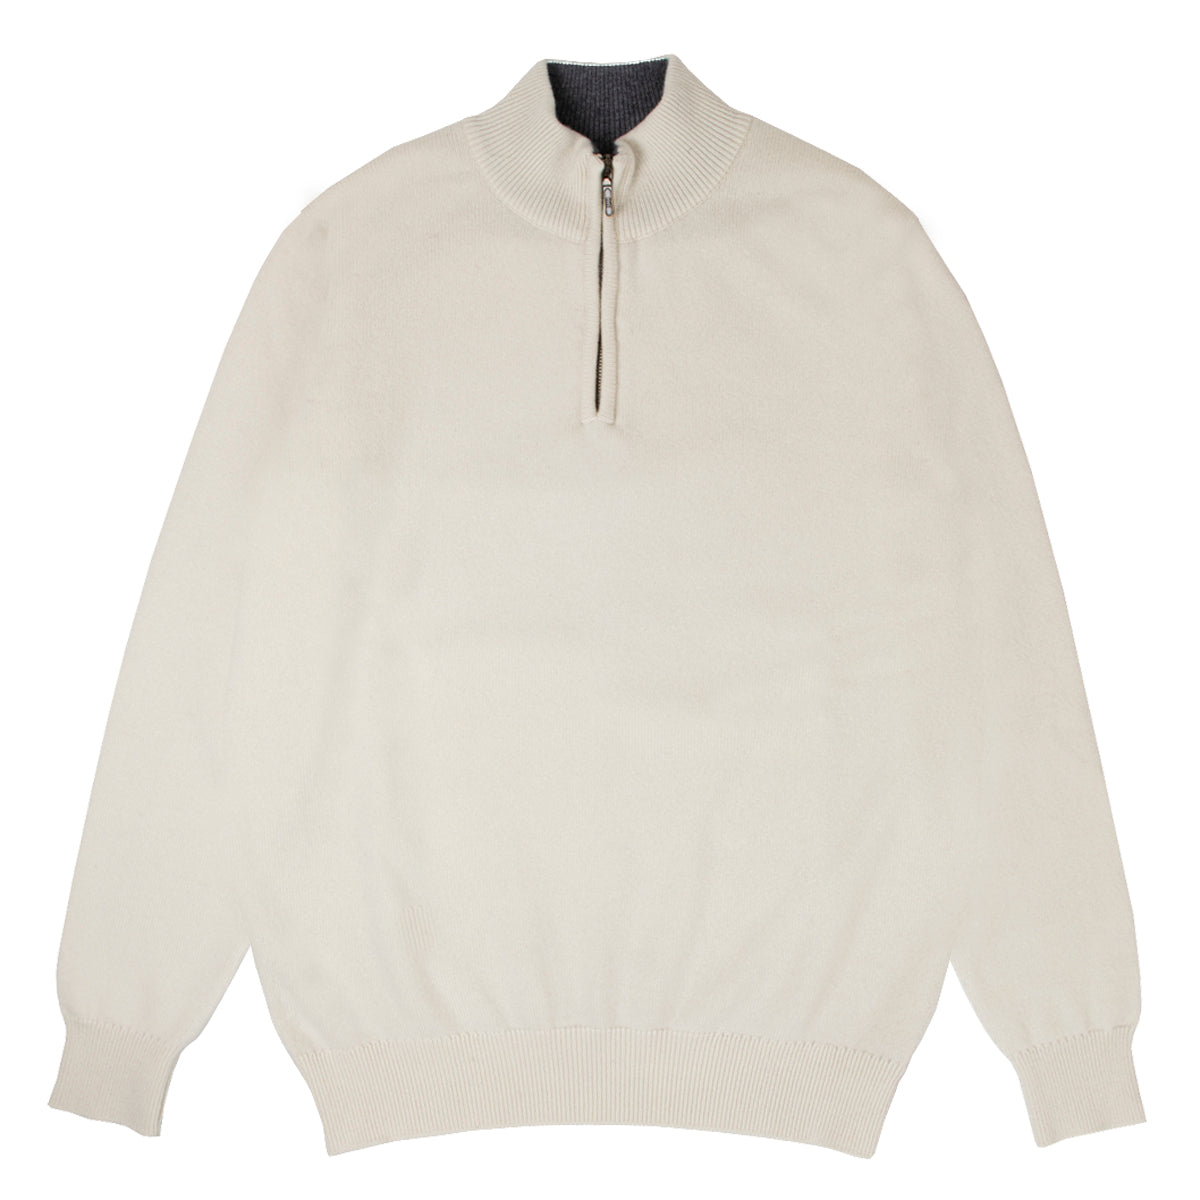 The Bowmore 1/4 Zip Neck Cashmere Sweater - White Undyed / Smog  Robert Old   